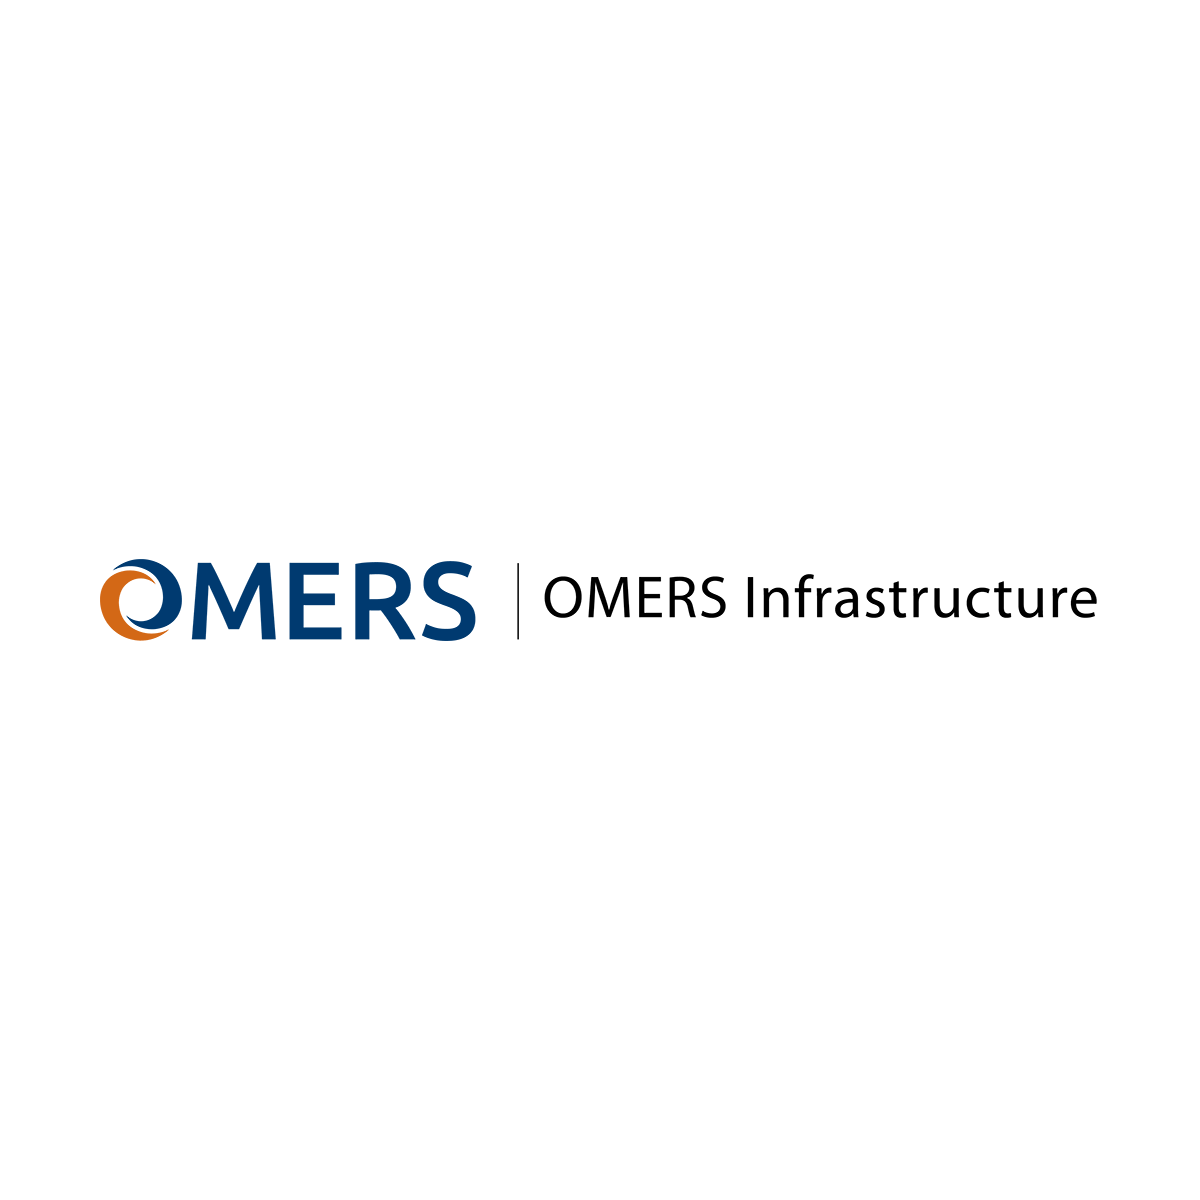 Infrastructure Logo - OMERS Infrastructure - Home